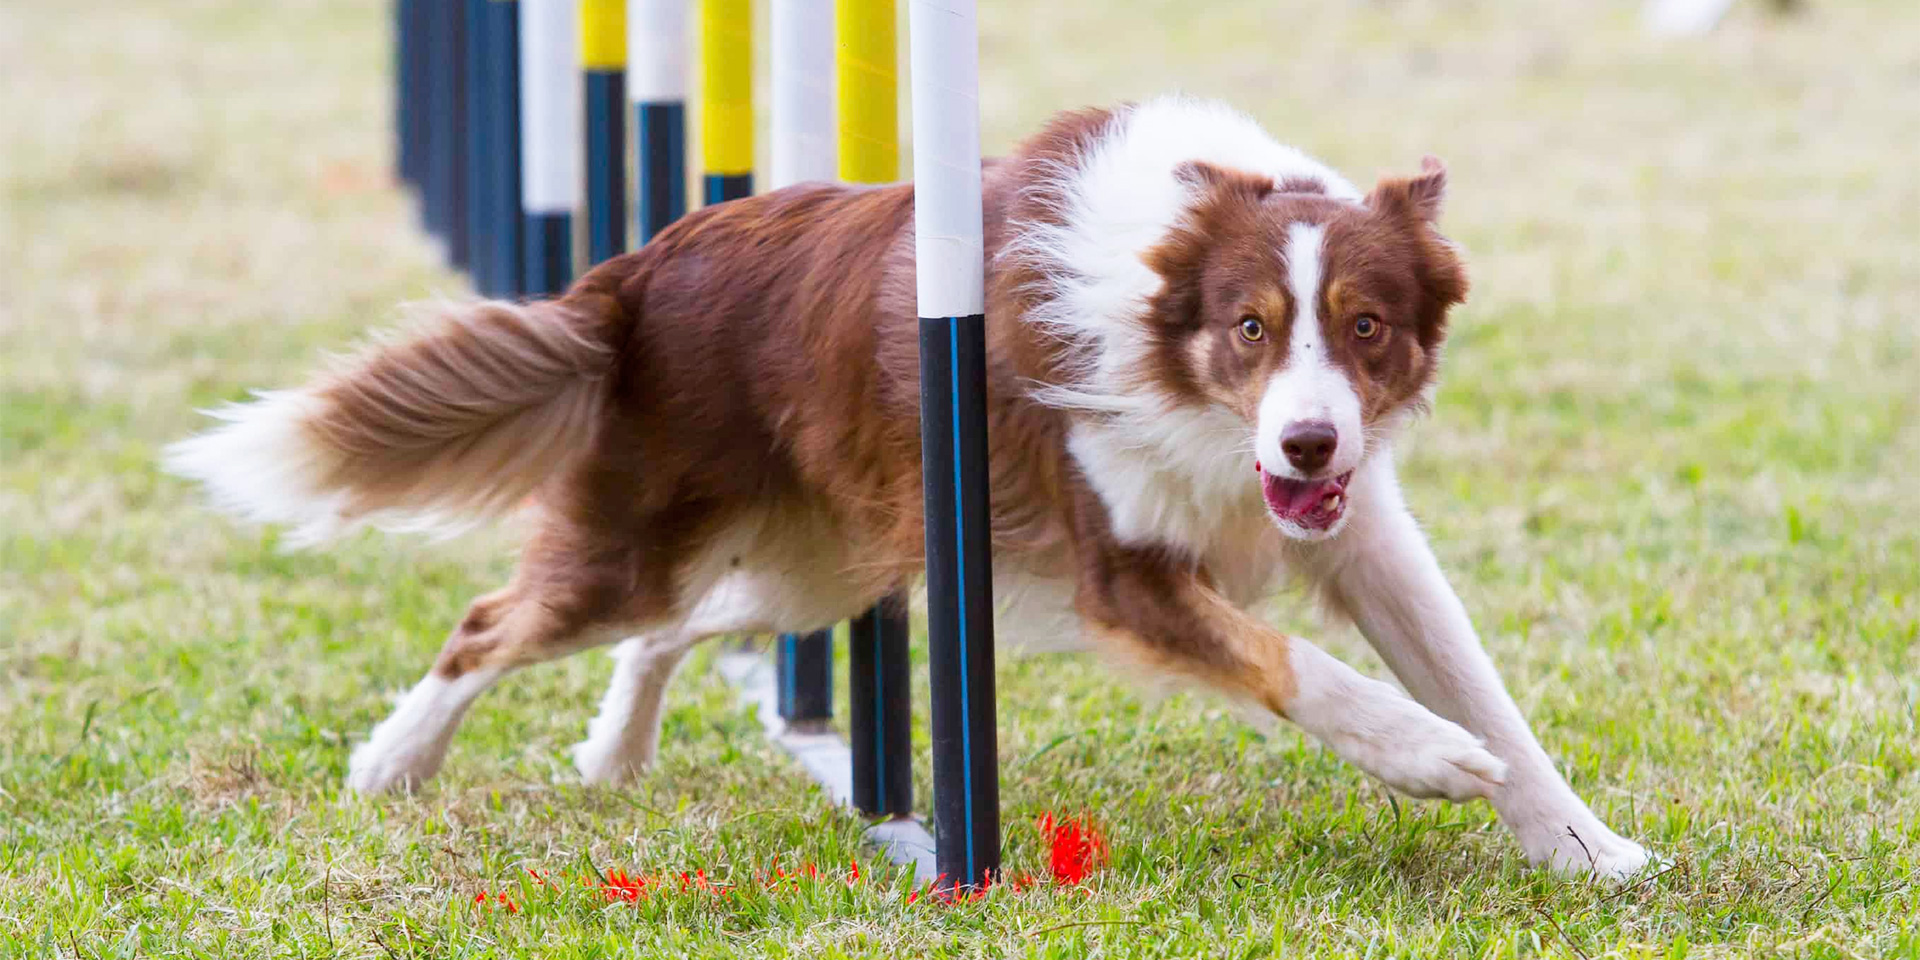 How To Prepare For A Charity Dog-Friendly Physical Activity?